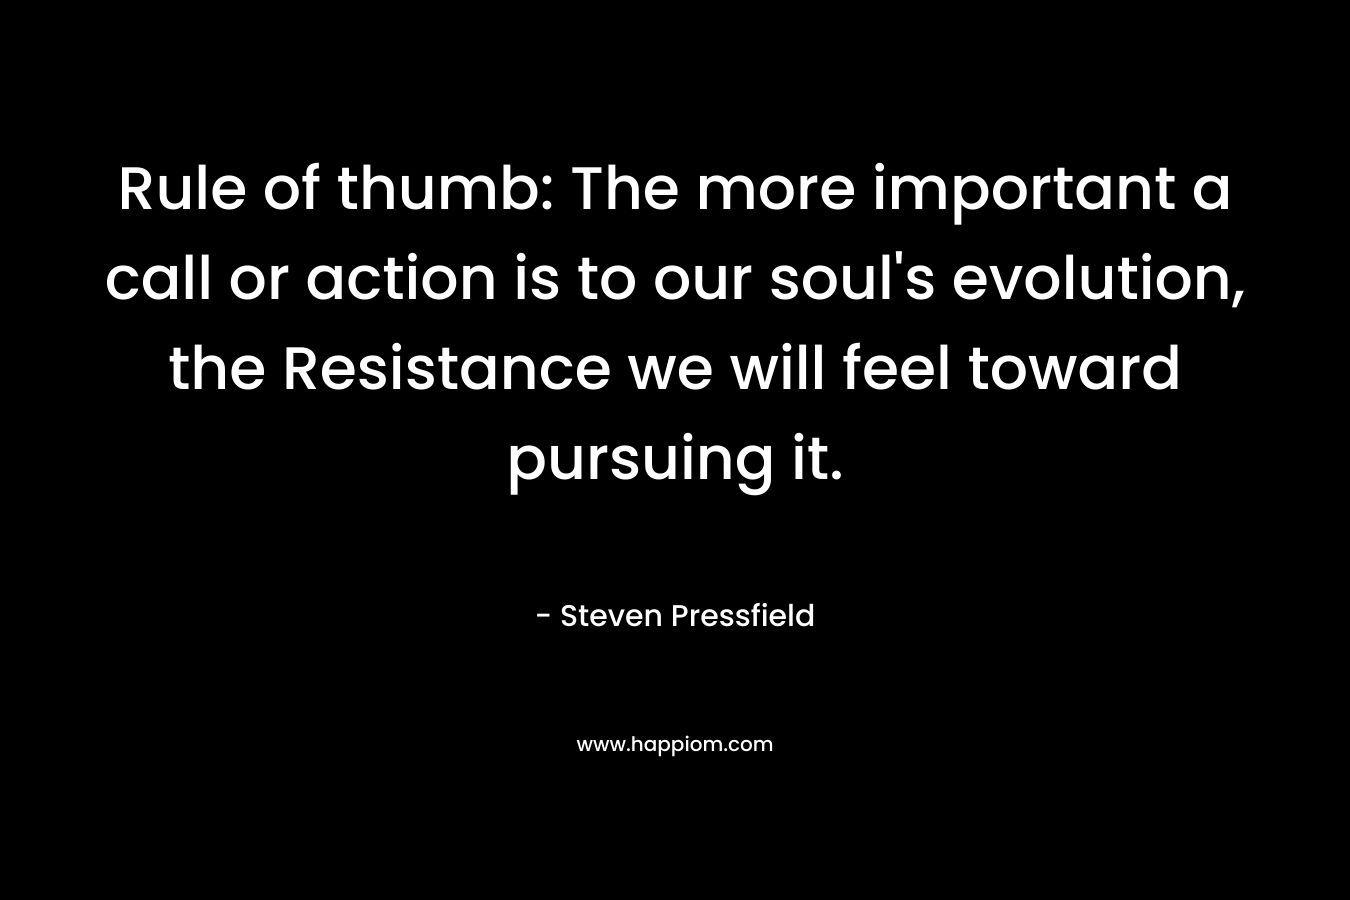 Rule of thumb: The more important a call or action is to our soul's evolution, the Resistance we will feel toward pursuing it.